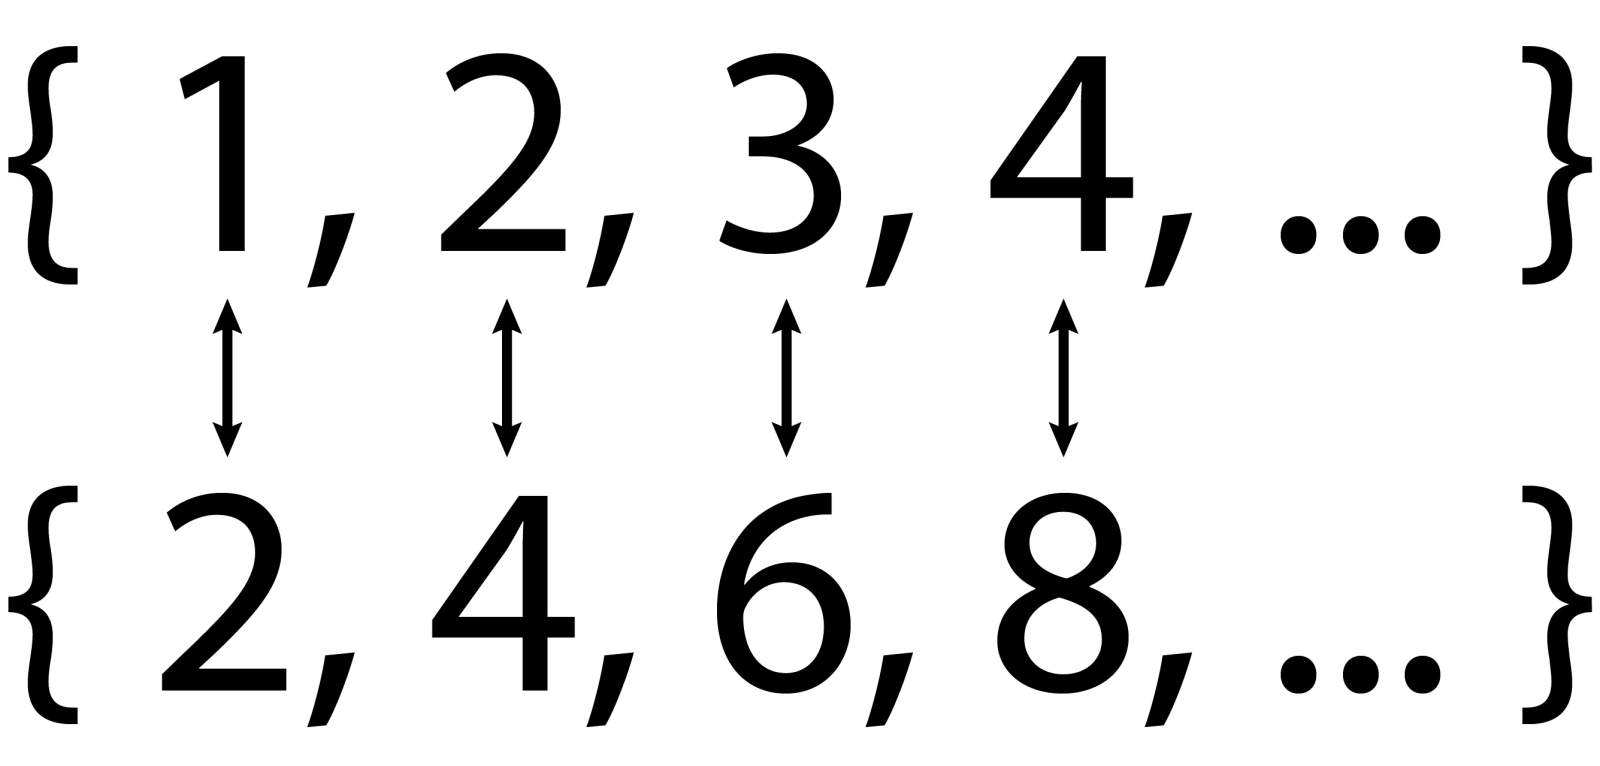 A one-to-one correspondence between the counting numbers and the even numbers